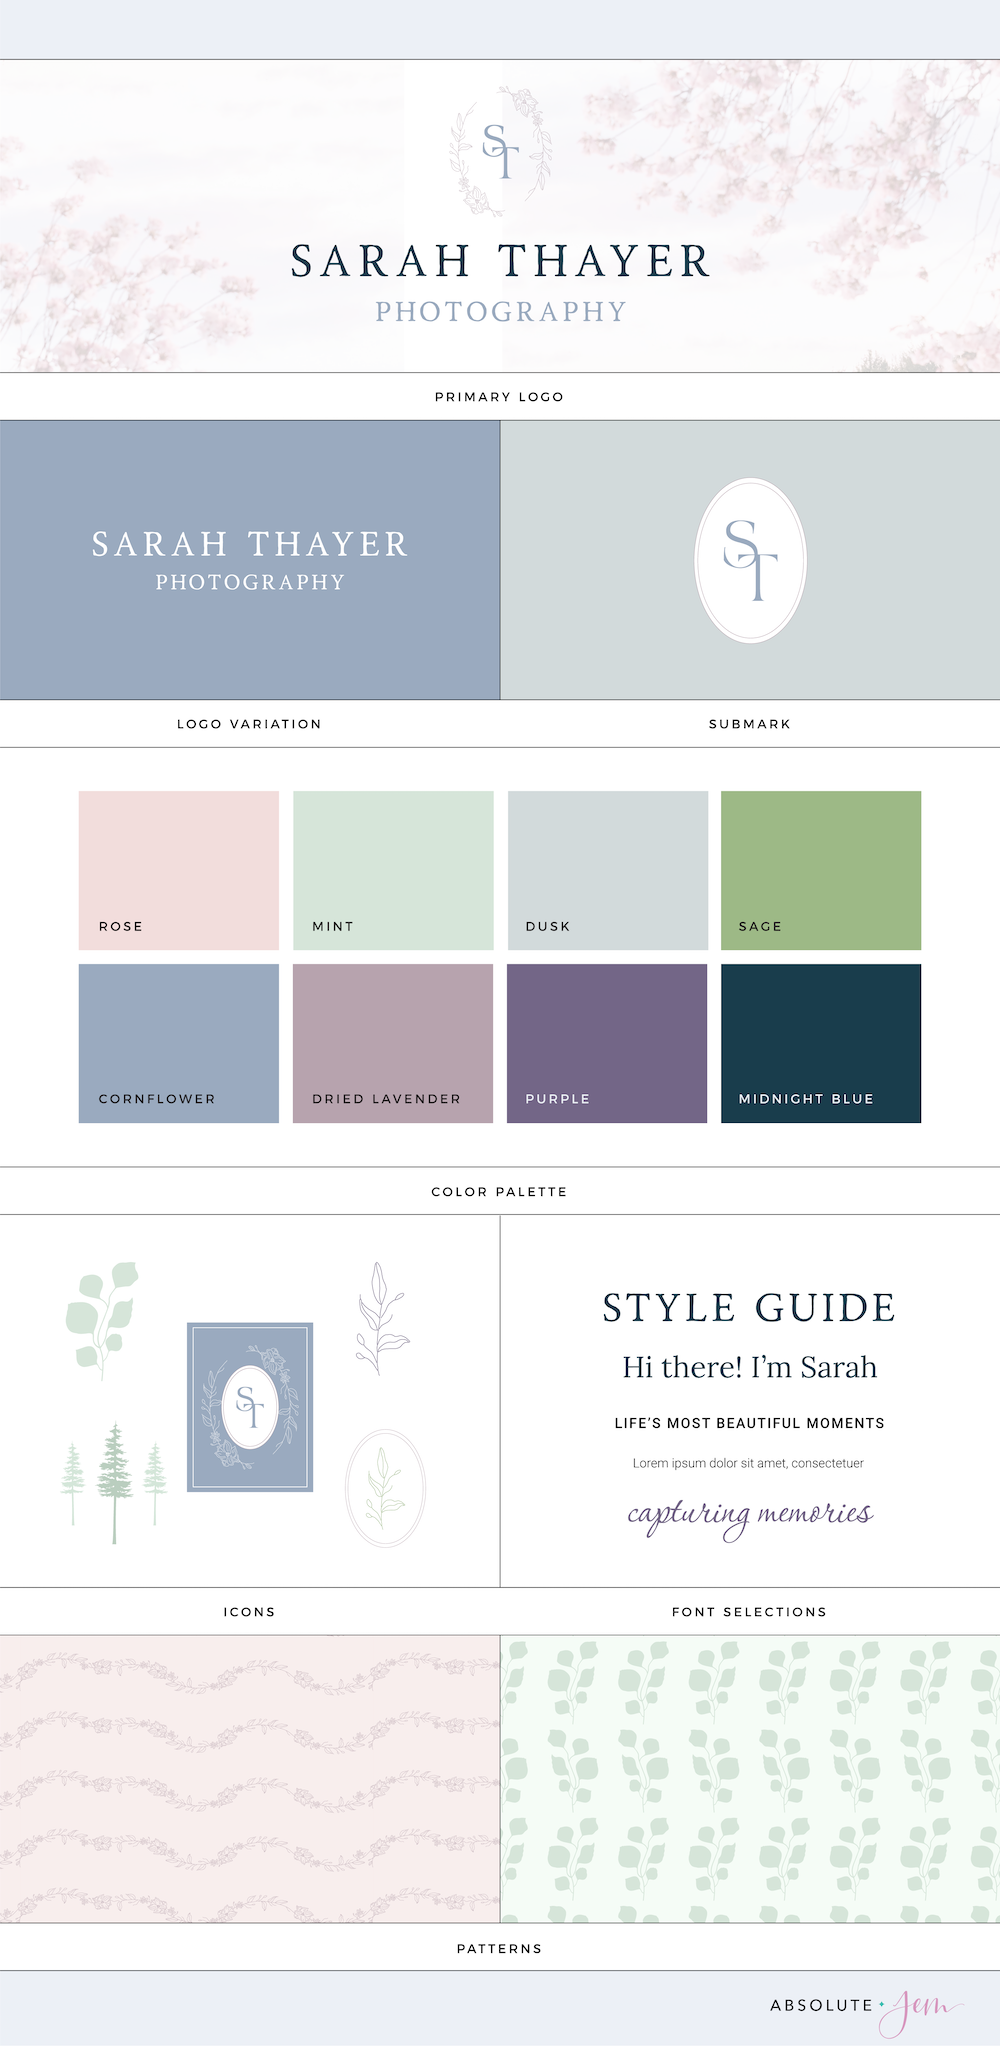 Sarah Thayer Photography | Brand Identity by Absolute JEM